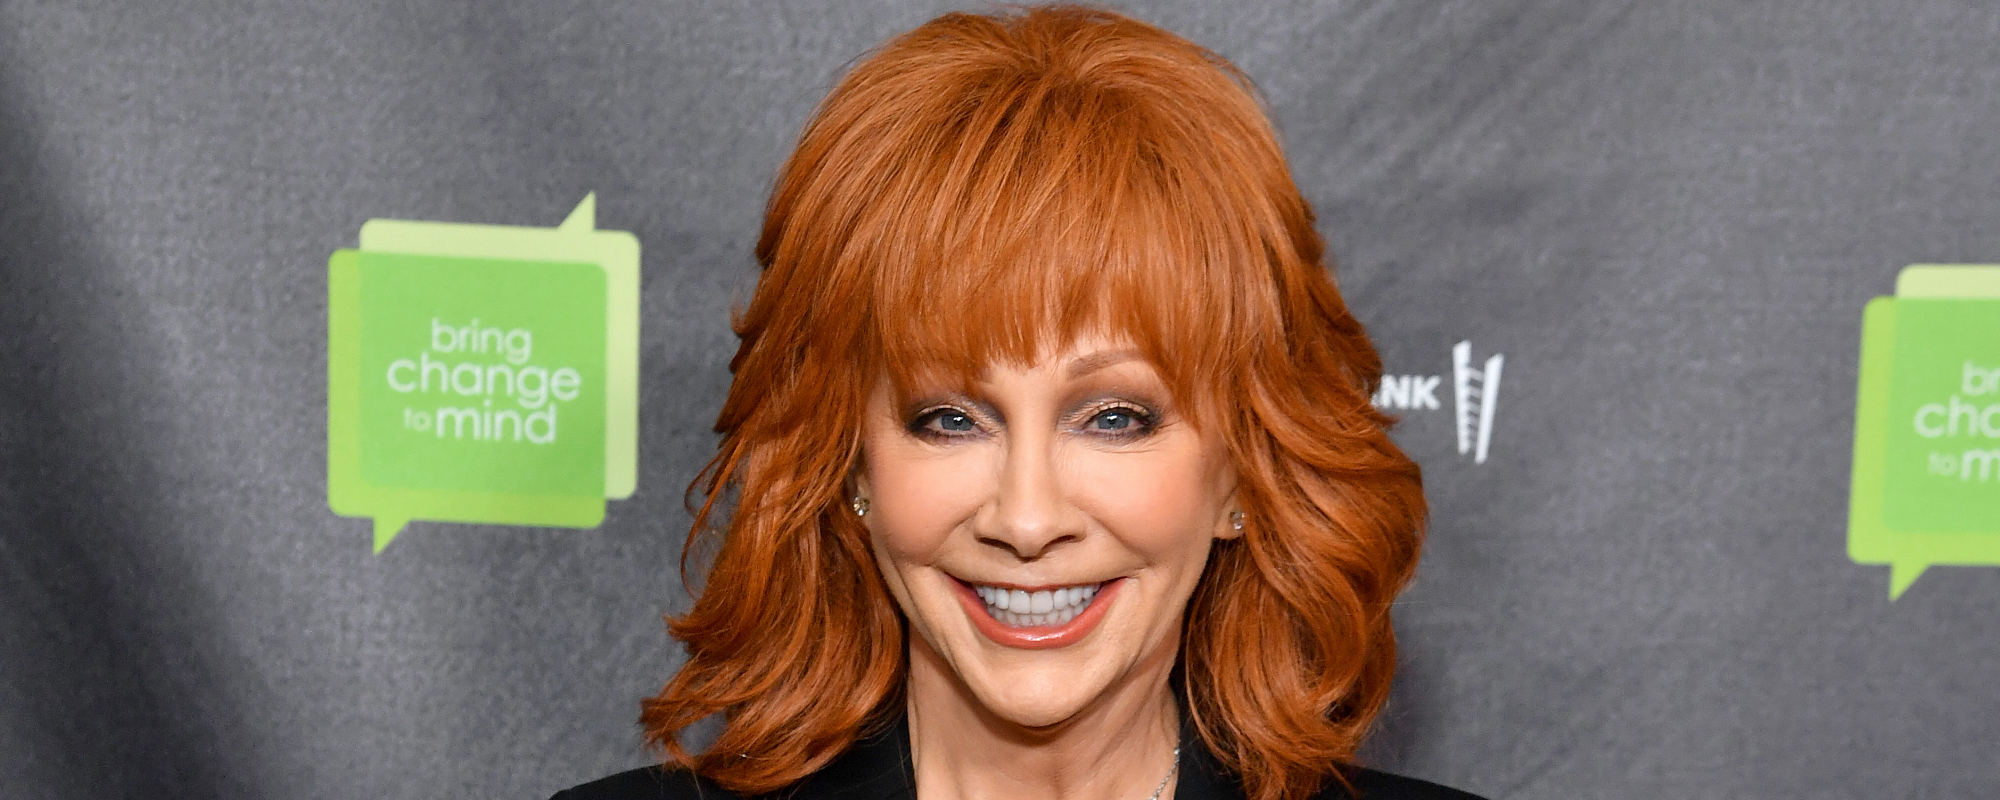 Reba McEntire Sends Fans Into a Frenzy With Her Super Bowl LVIII Performance Reaction